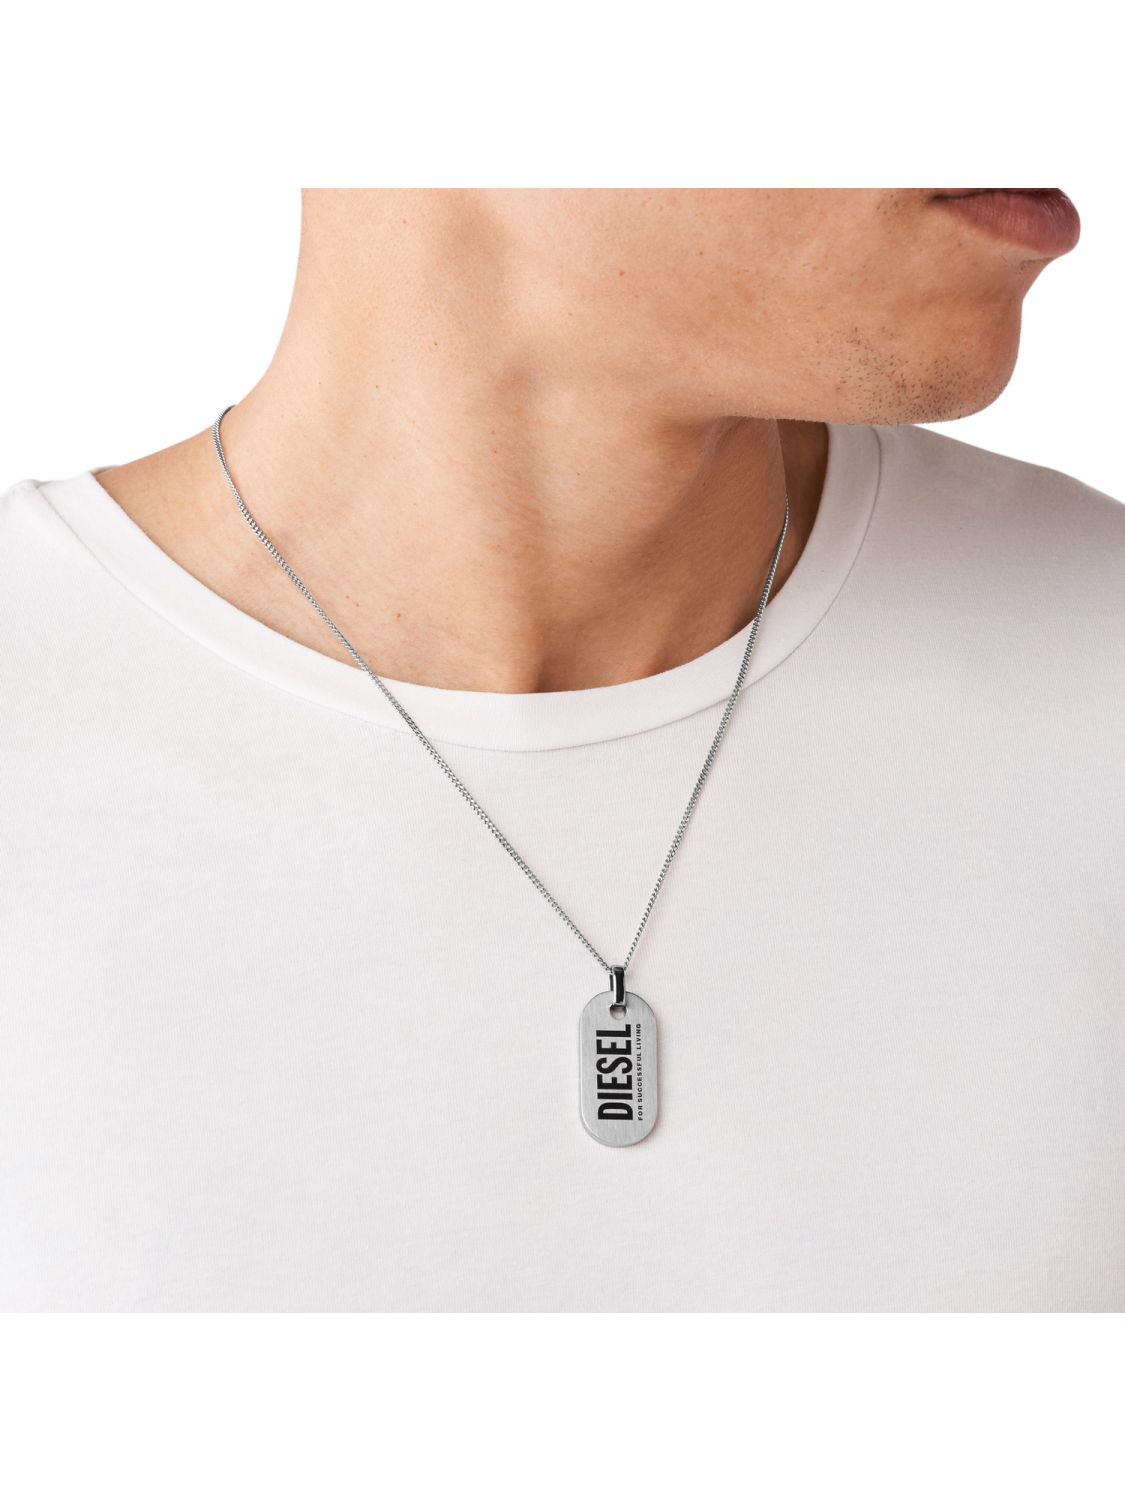 Diesel Men\'s Curb Chain Necklace with Dog Tag Pendant DX1348040 • uhrcenter